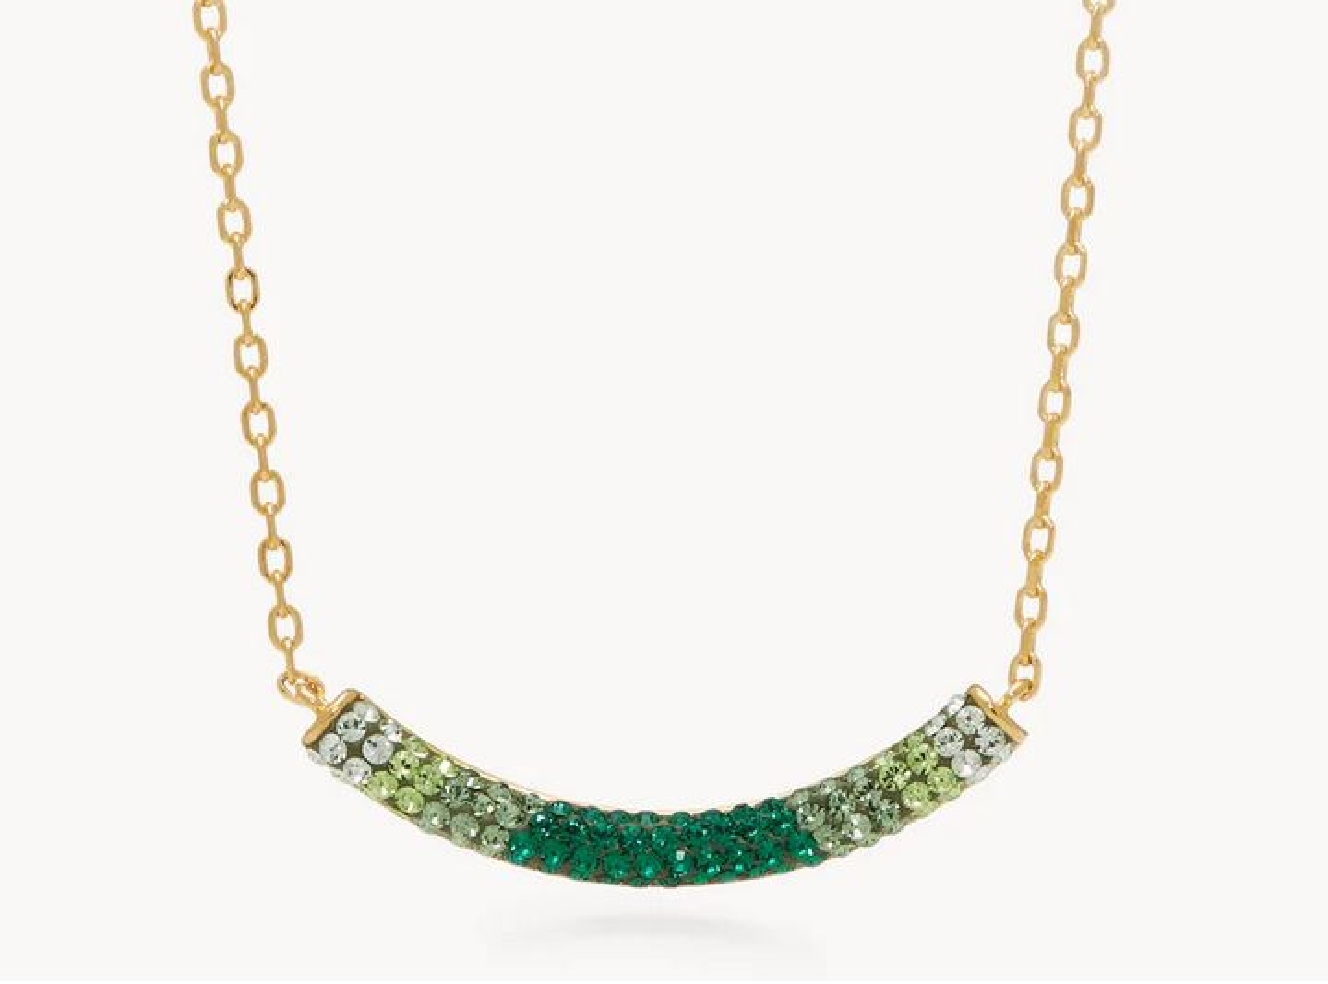 H&amp;B
Sparkle Curved Bar Necklace
Evergreen

...